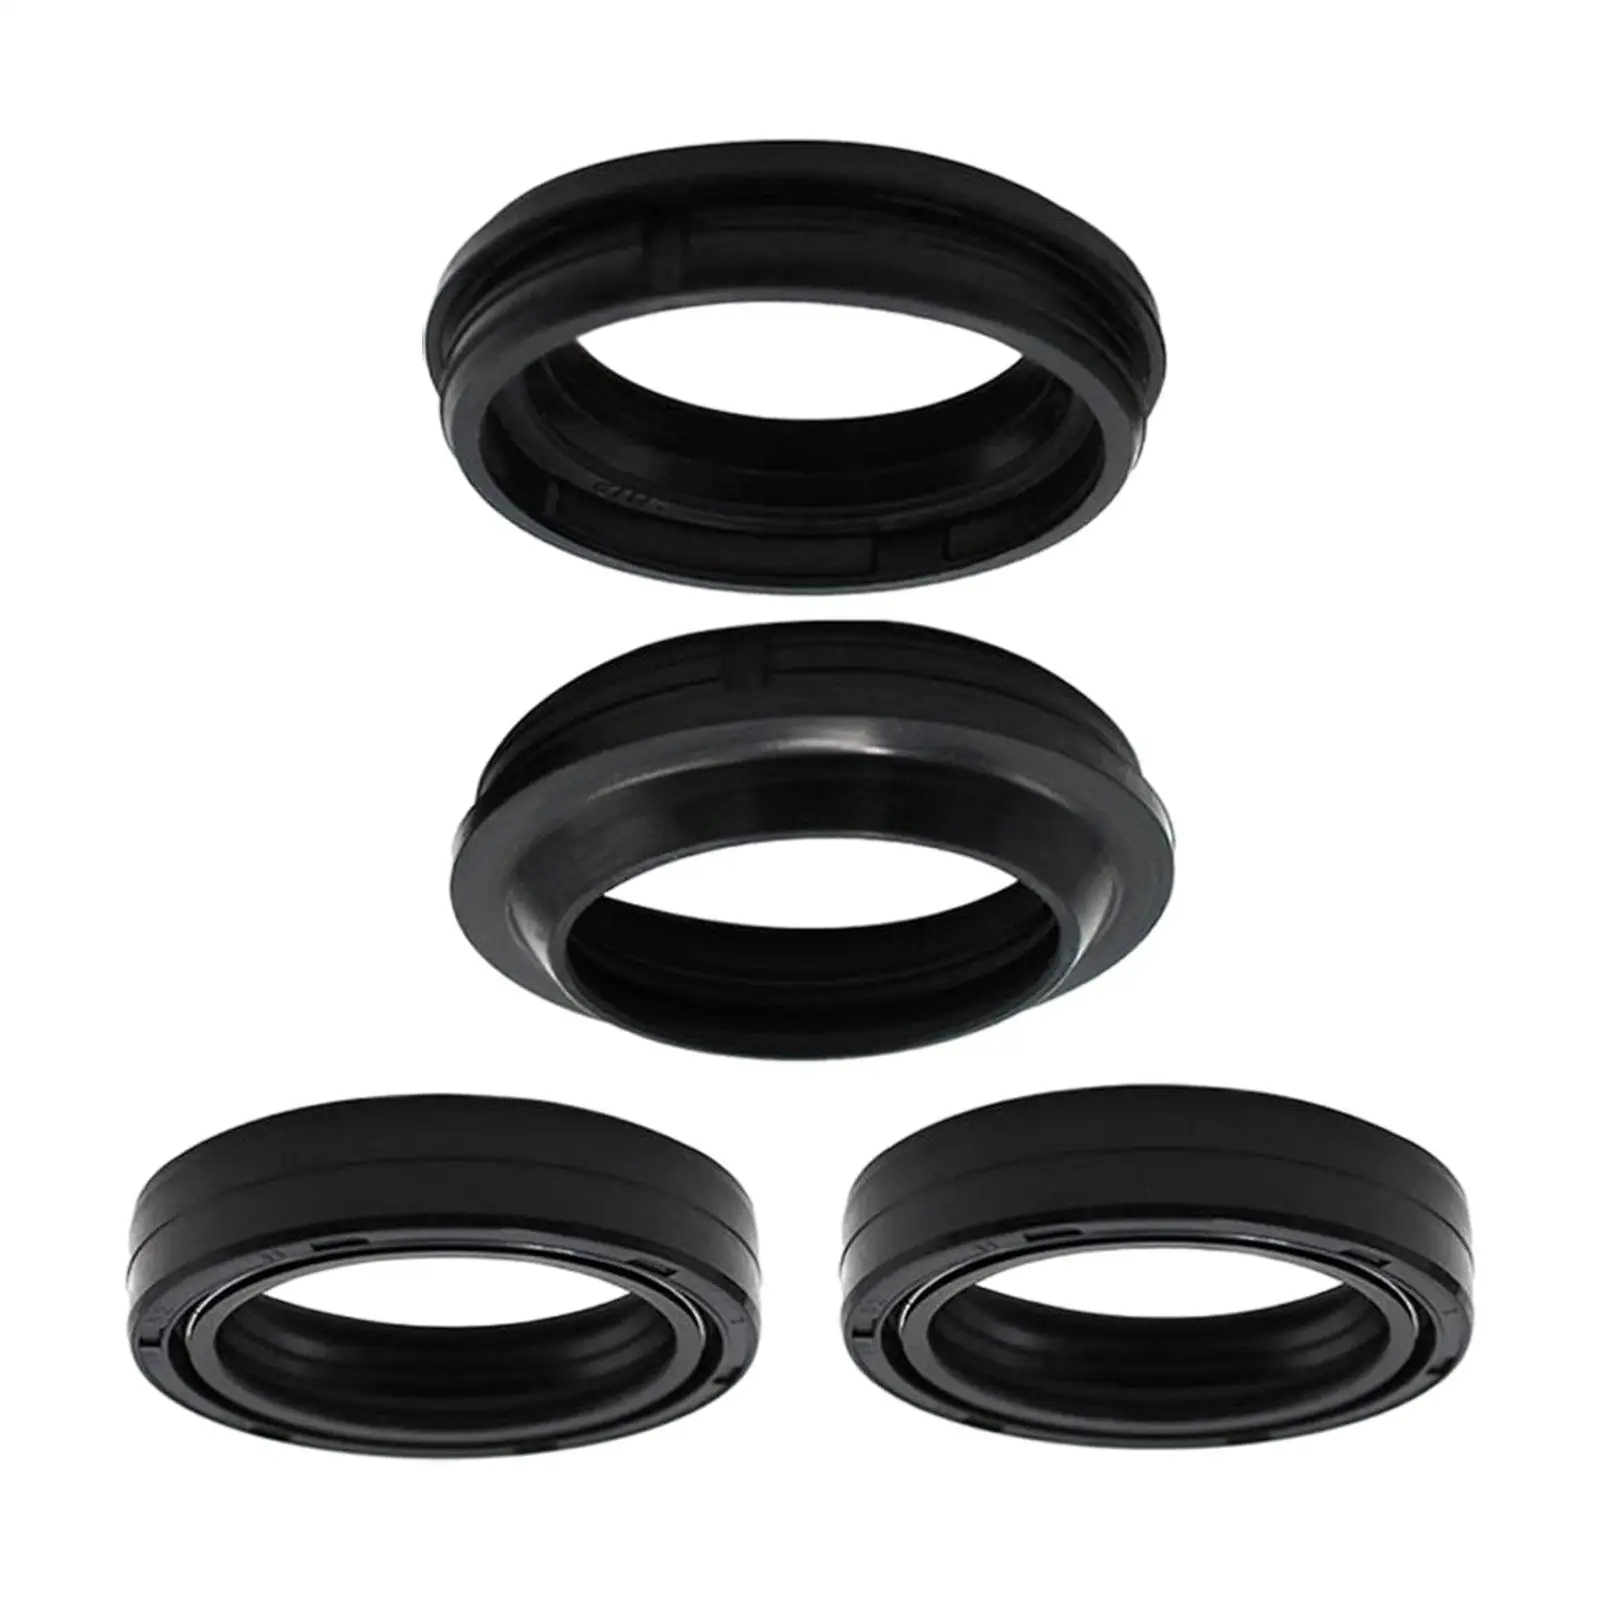 4x Front Fork Oil Seal & Dust Cover Rubber for Yamaha XT 125 R Bra